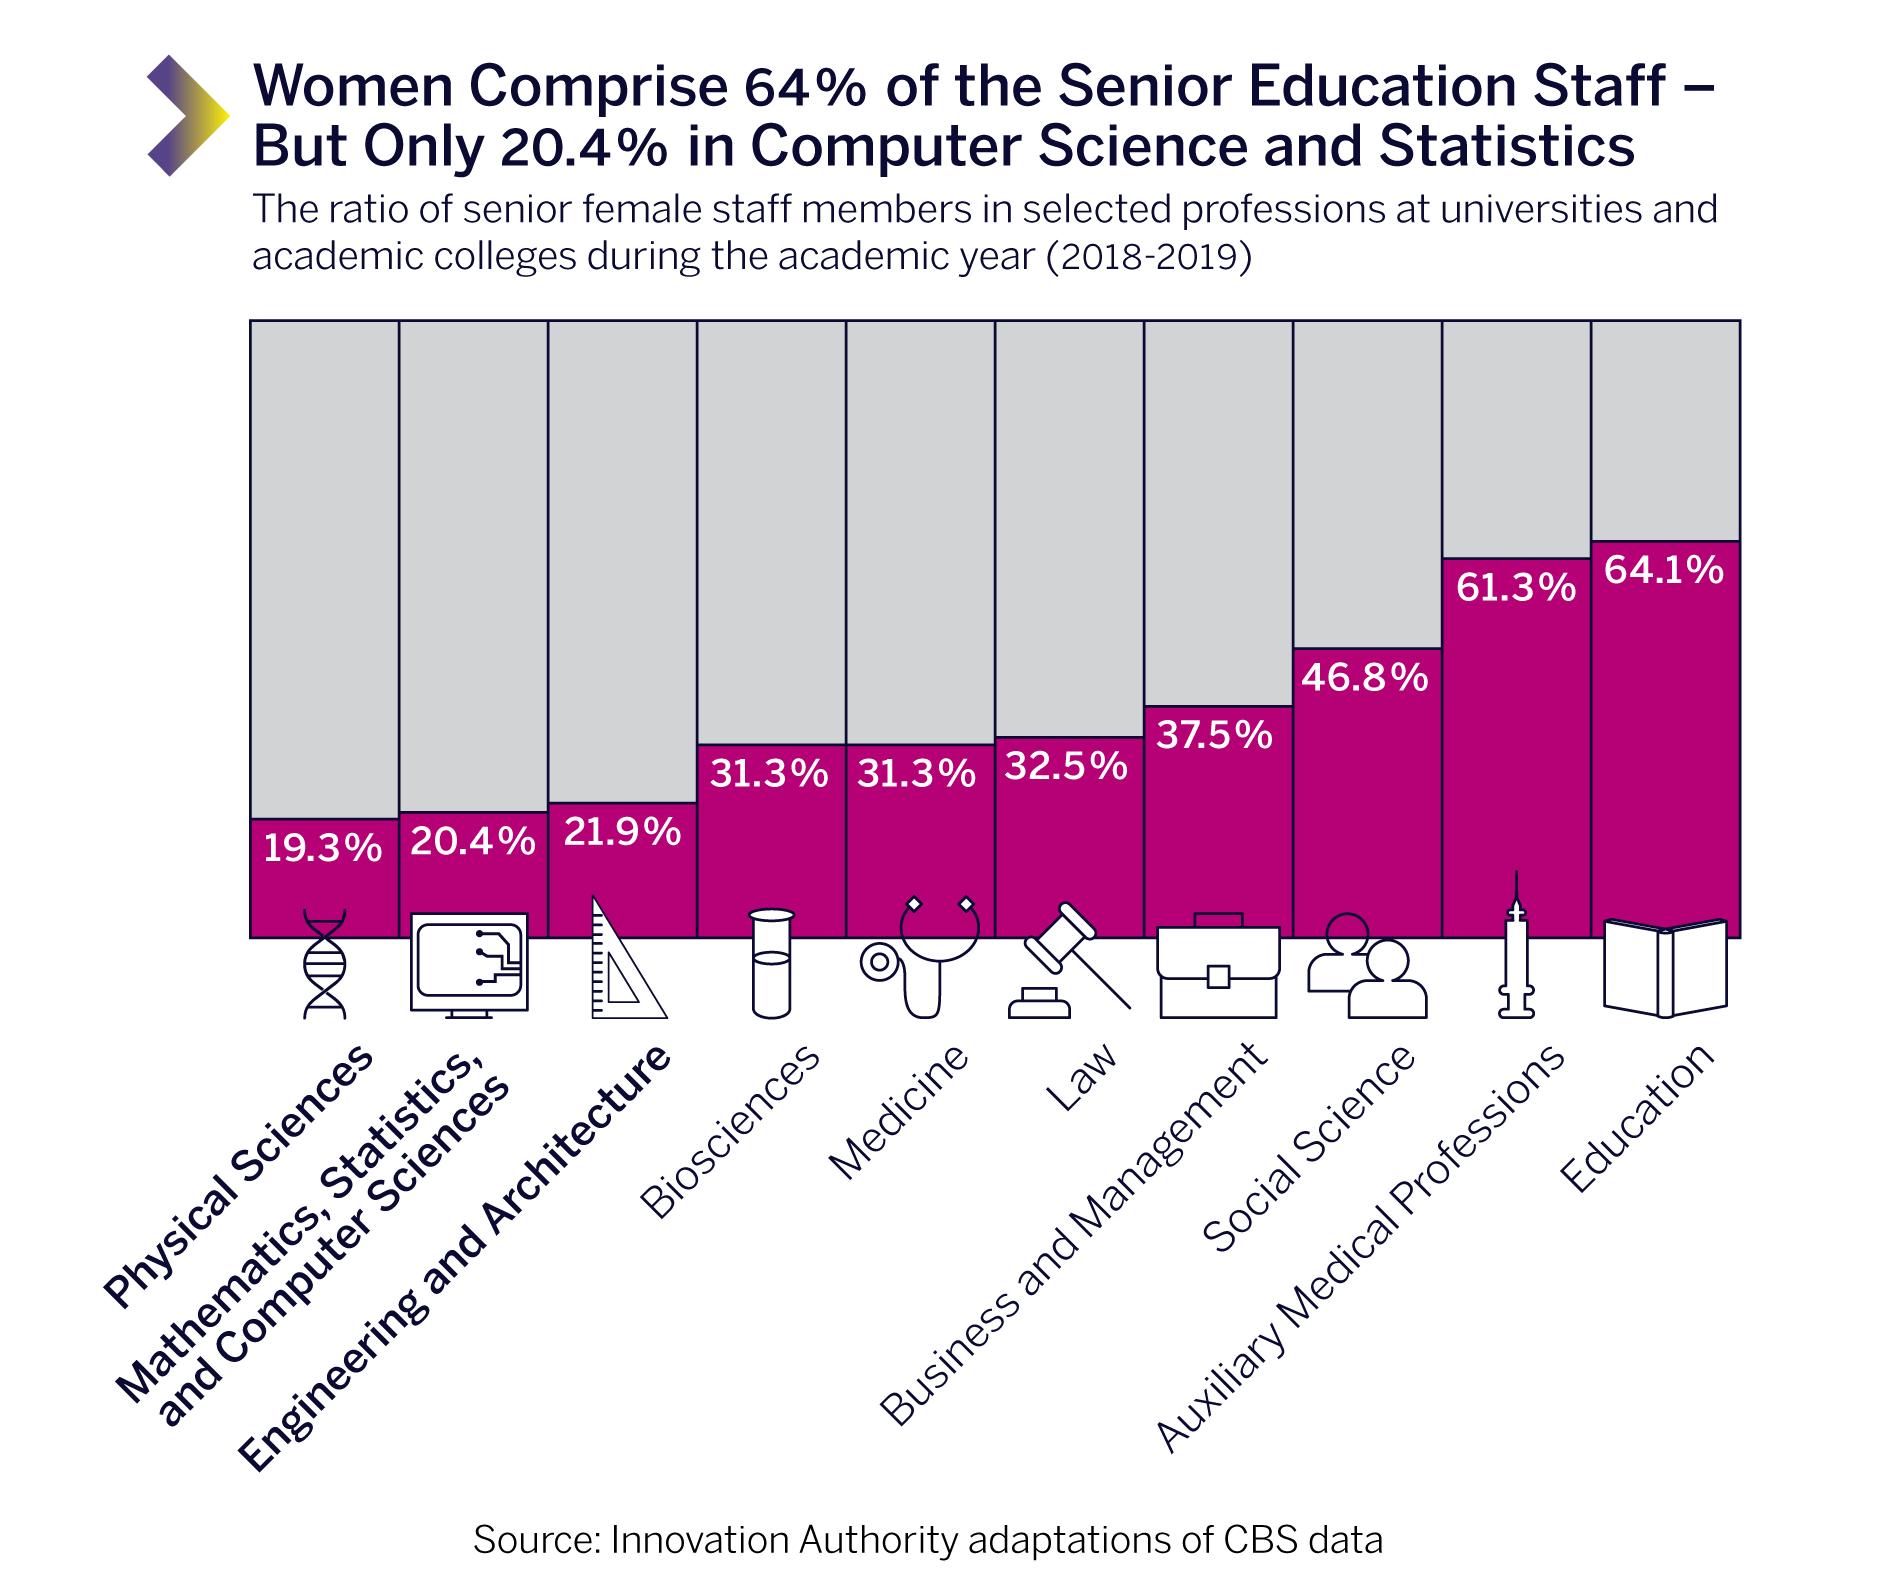 Women Comprise 64% of the Senior Education Staff – But Only 20.4% in Computer Science and Statistics